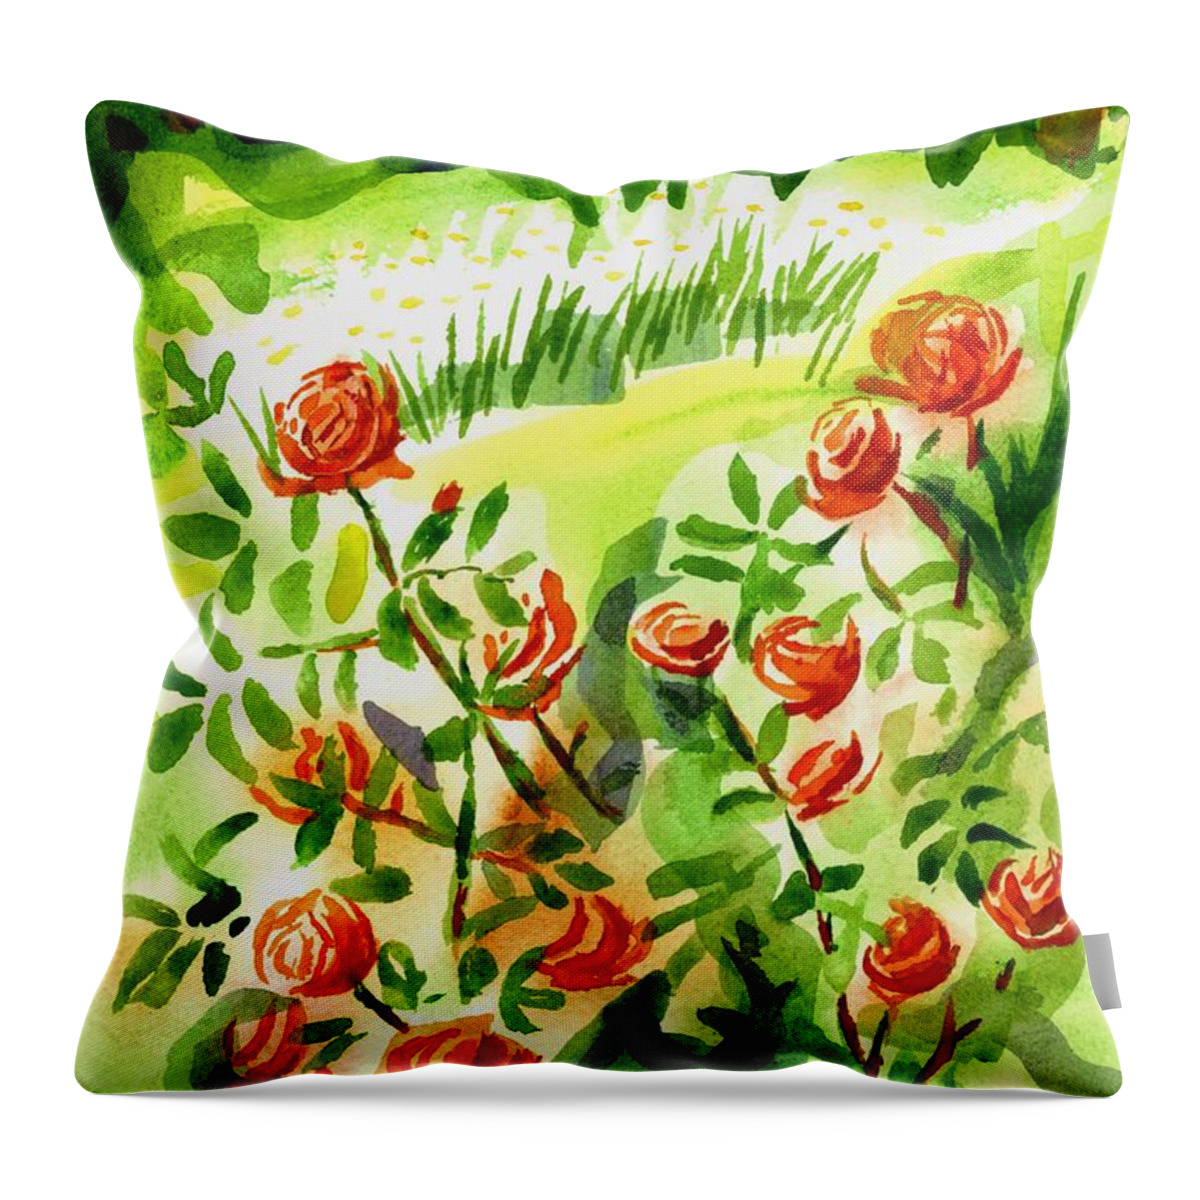 Red Roses With Daisies In The Garden Throw Pillow featuring the painting Red Roses with Daisies in the Garden by Kip DeVore